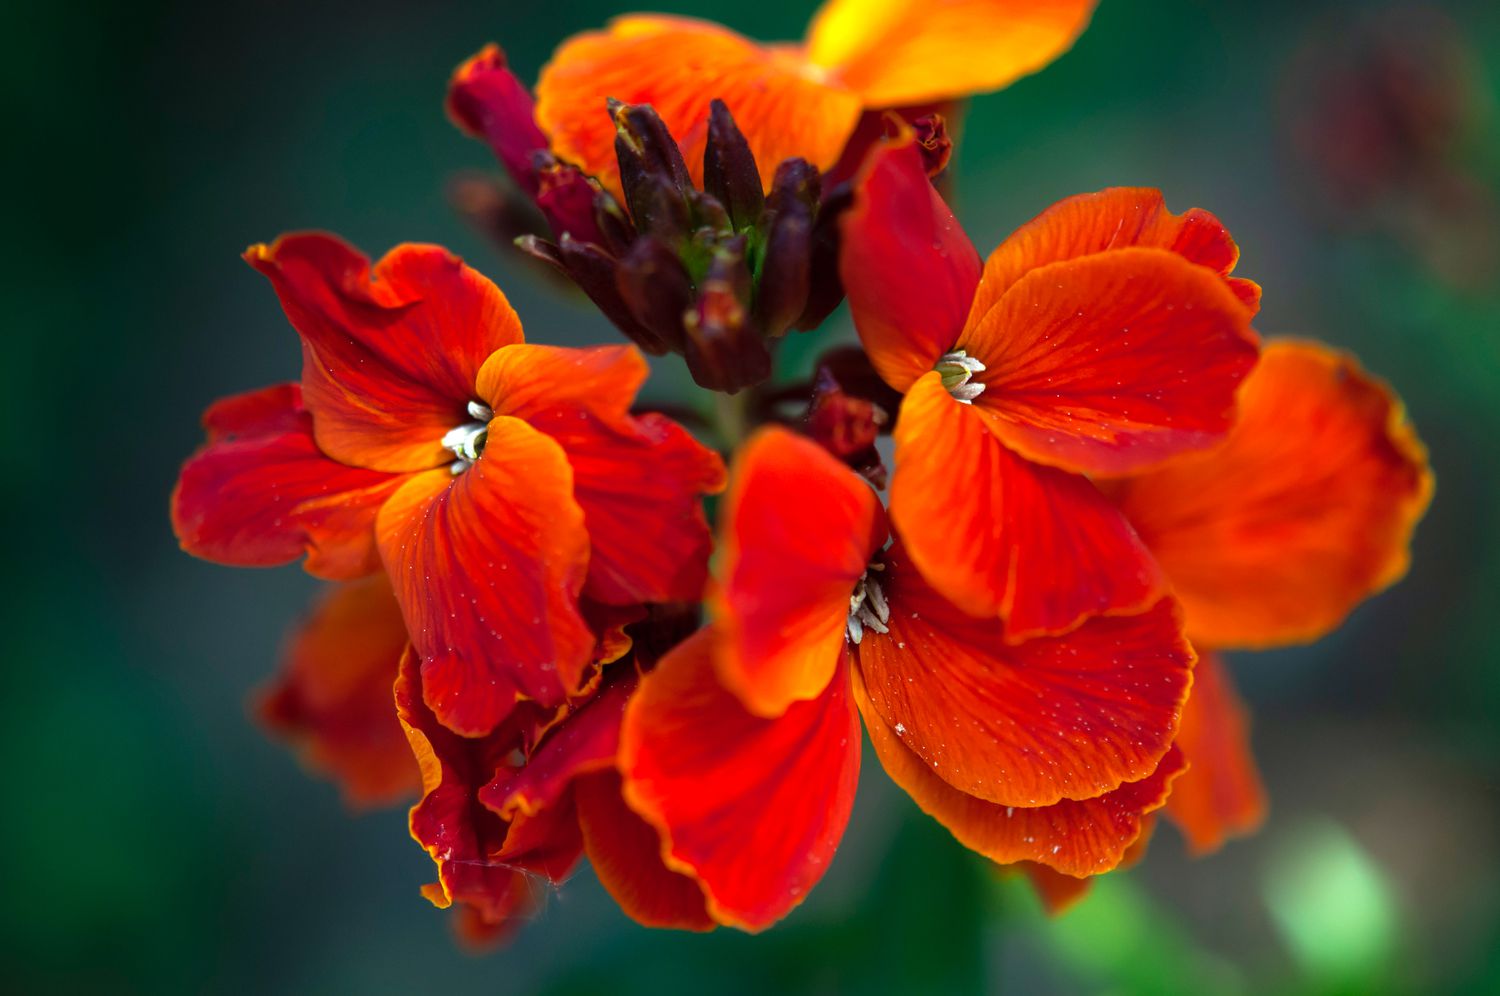 Fire king wallflower plant with red flowers and buds closeup